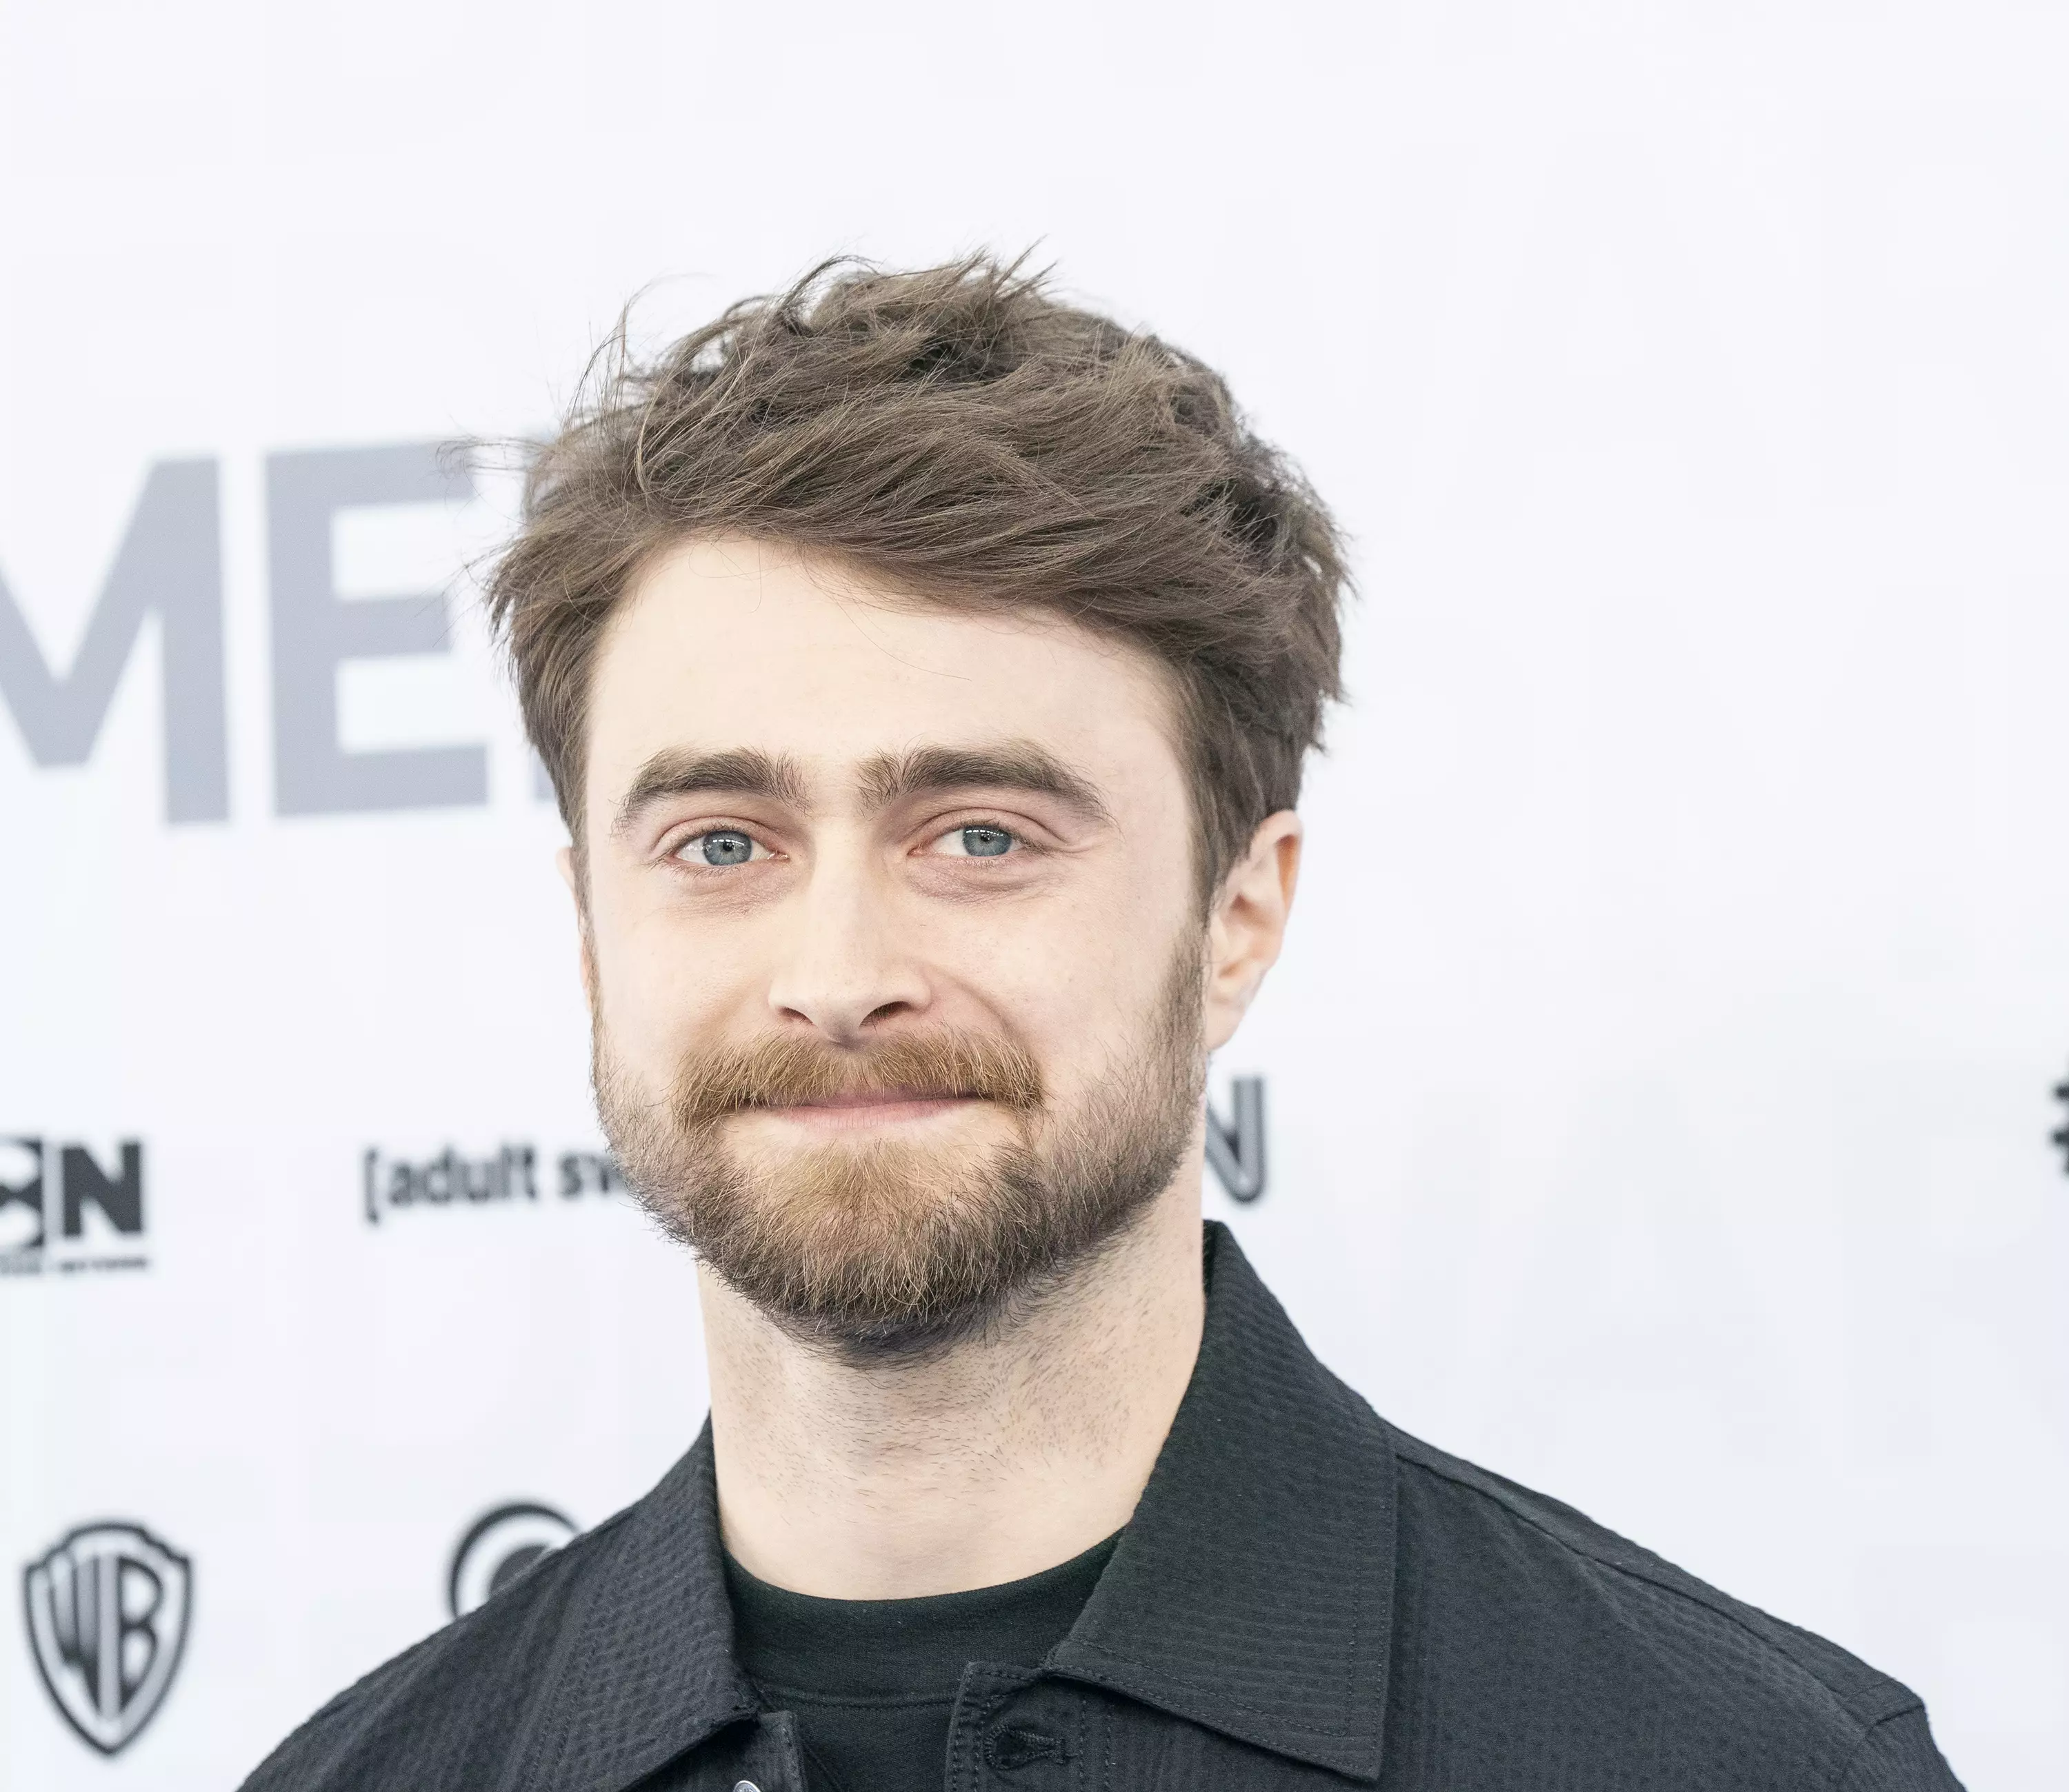 Radcliffe says he knows make-up artists won't like it, but he wants to anyway.